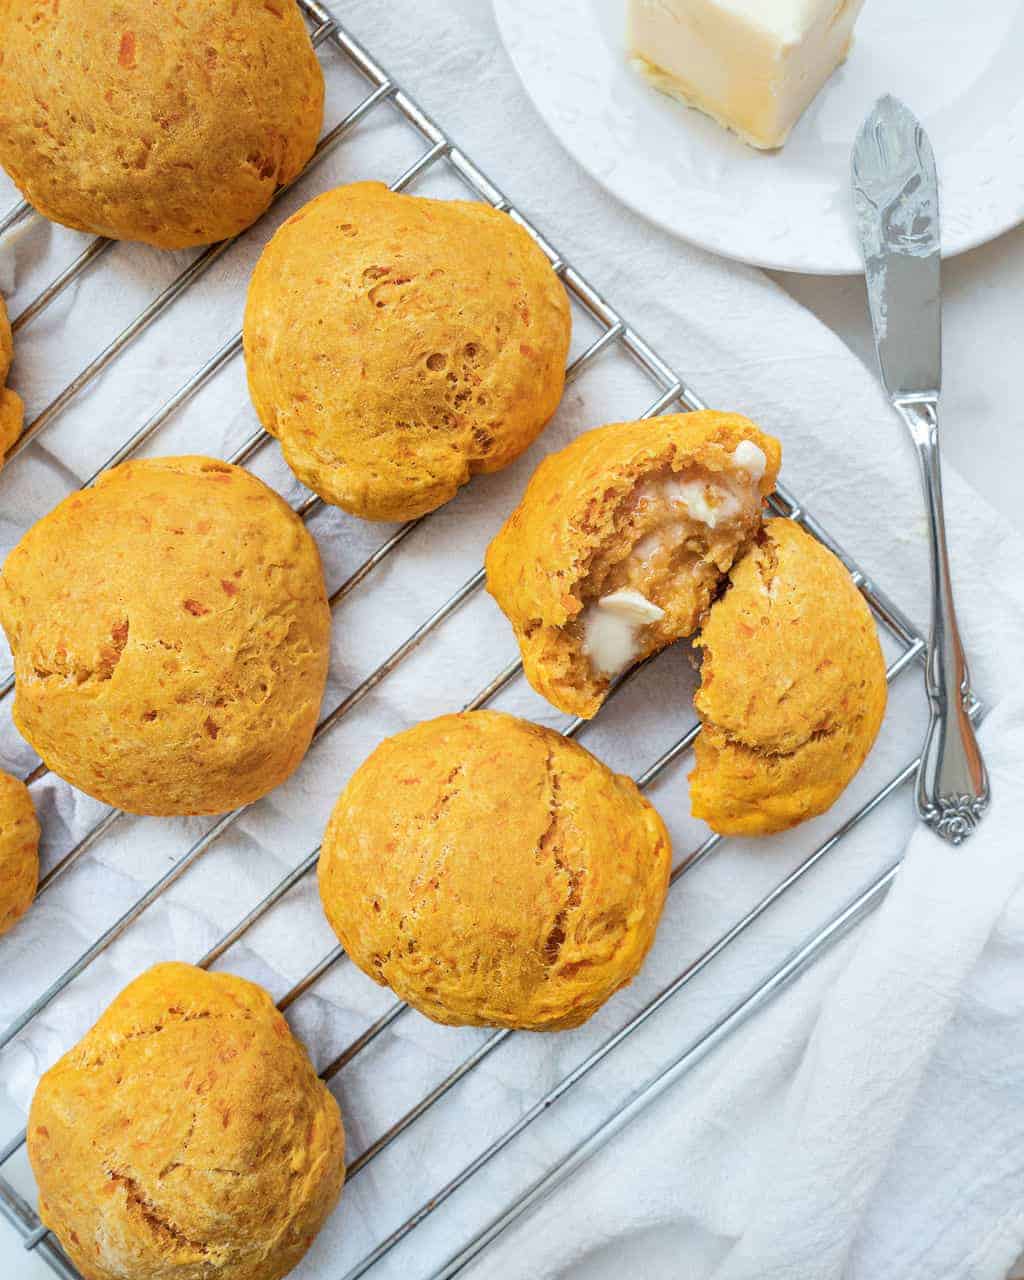 completed sweet potato biscuits on a cooling rack against a white surface